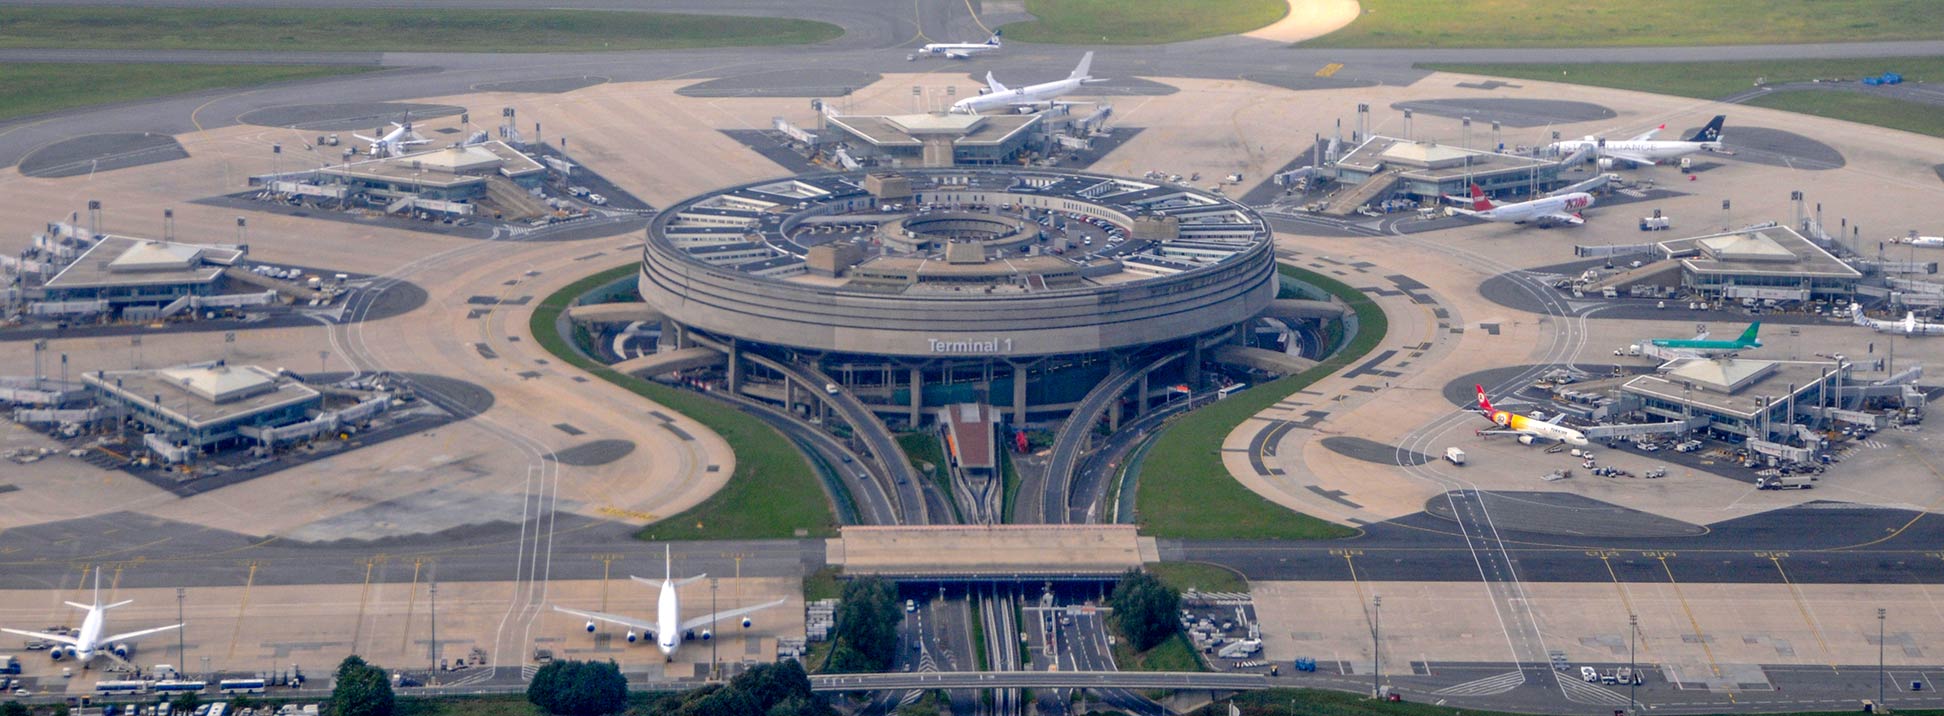 Top 10 Biggest Airports in | ASAPtickets® blog